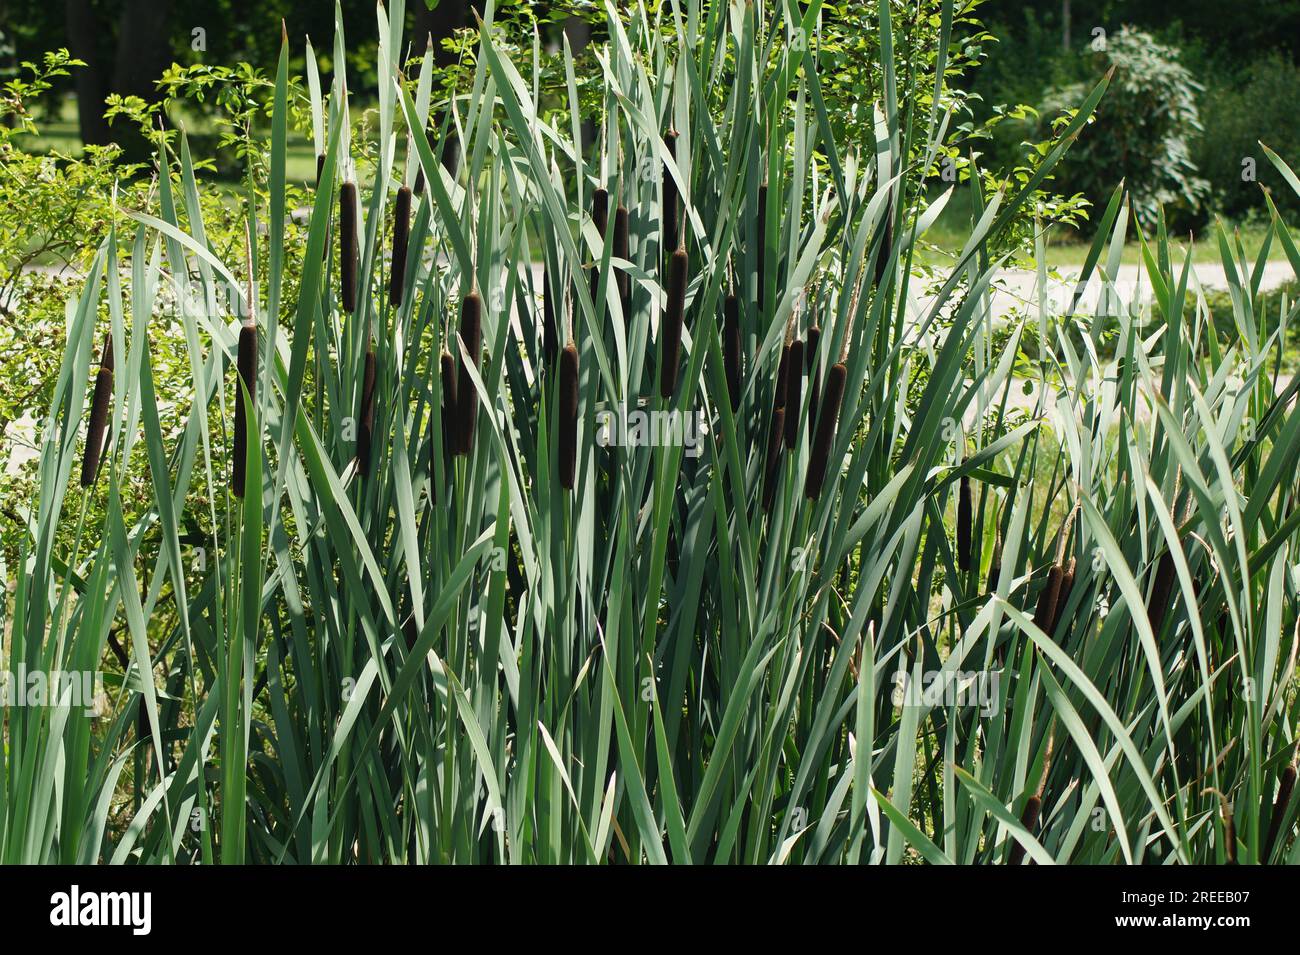 Broad-leaved bulrush, Typha latifolia, with inflorescence Stock Photo